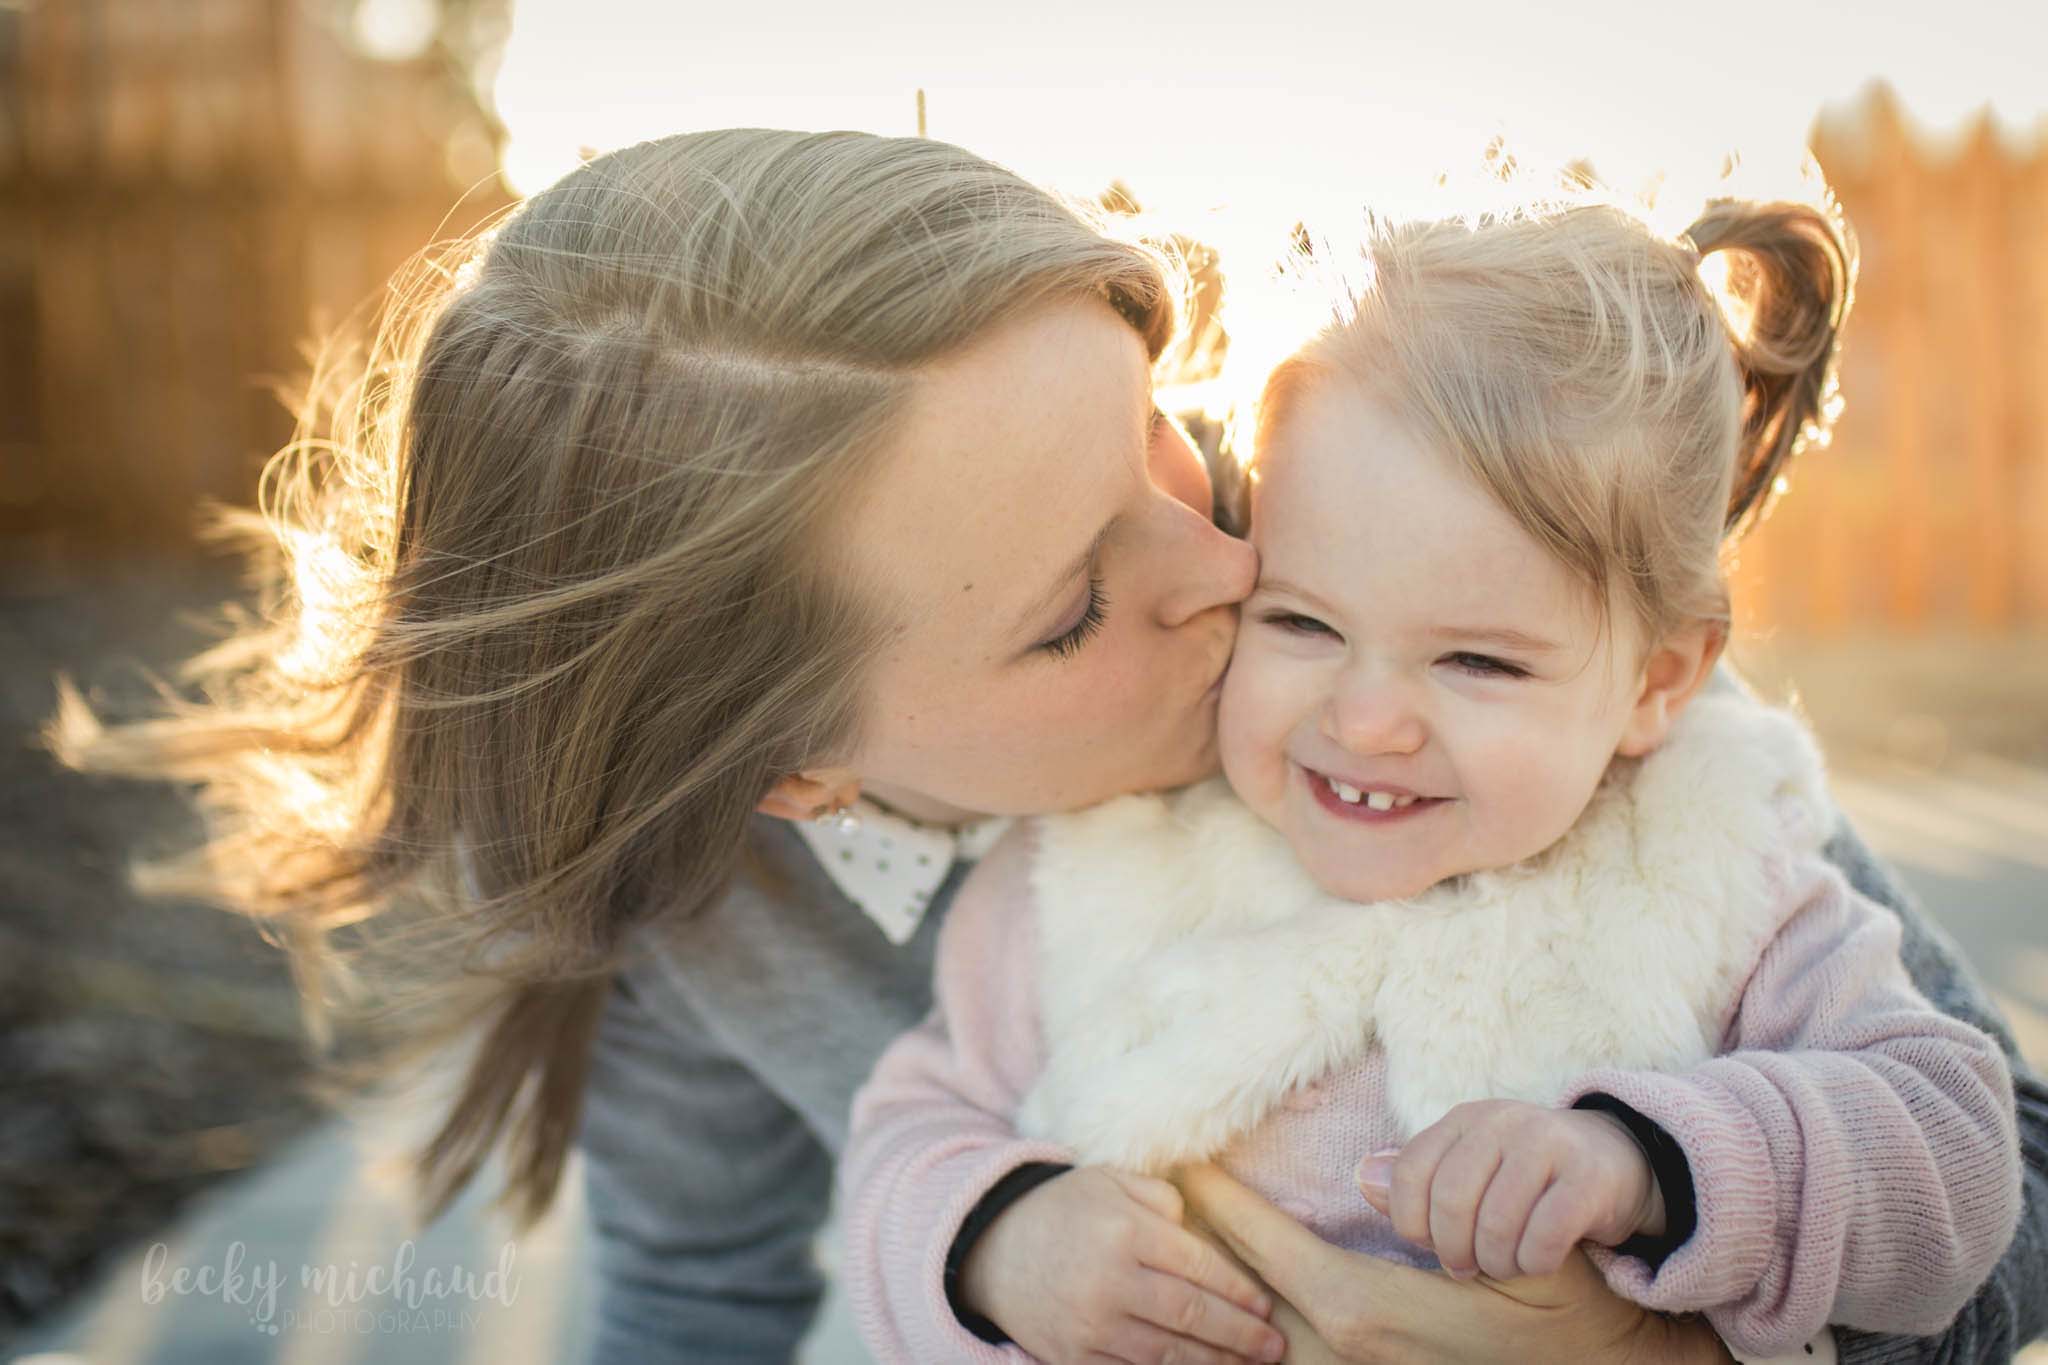 mama kissing her daughter's cheek in beautiful golden light during a photo session by Becky Michaud, Fort Collins photographer